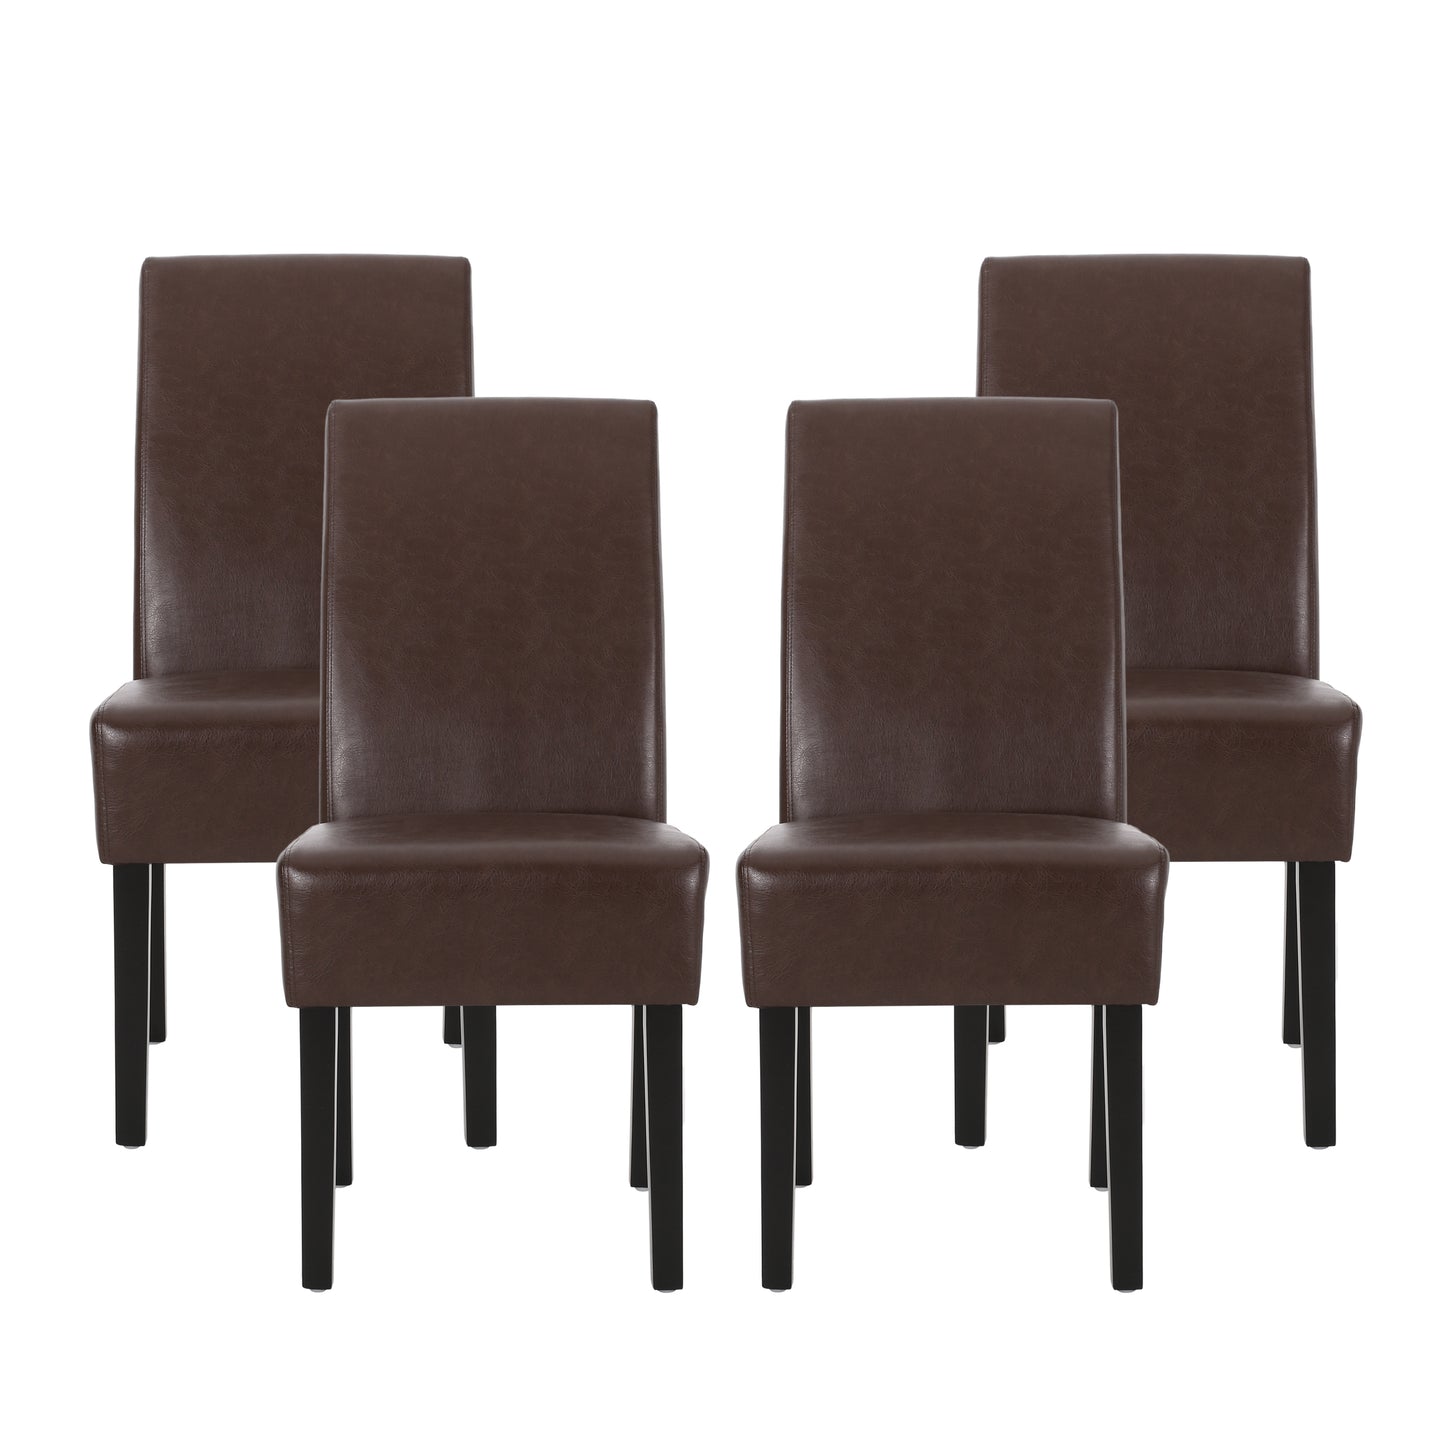 Thurber Contemporary Upholstered Dining Chairs, Set of 4